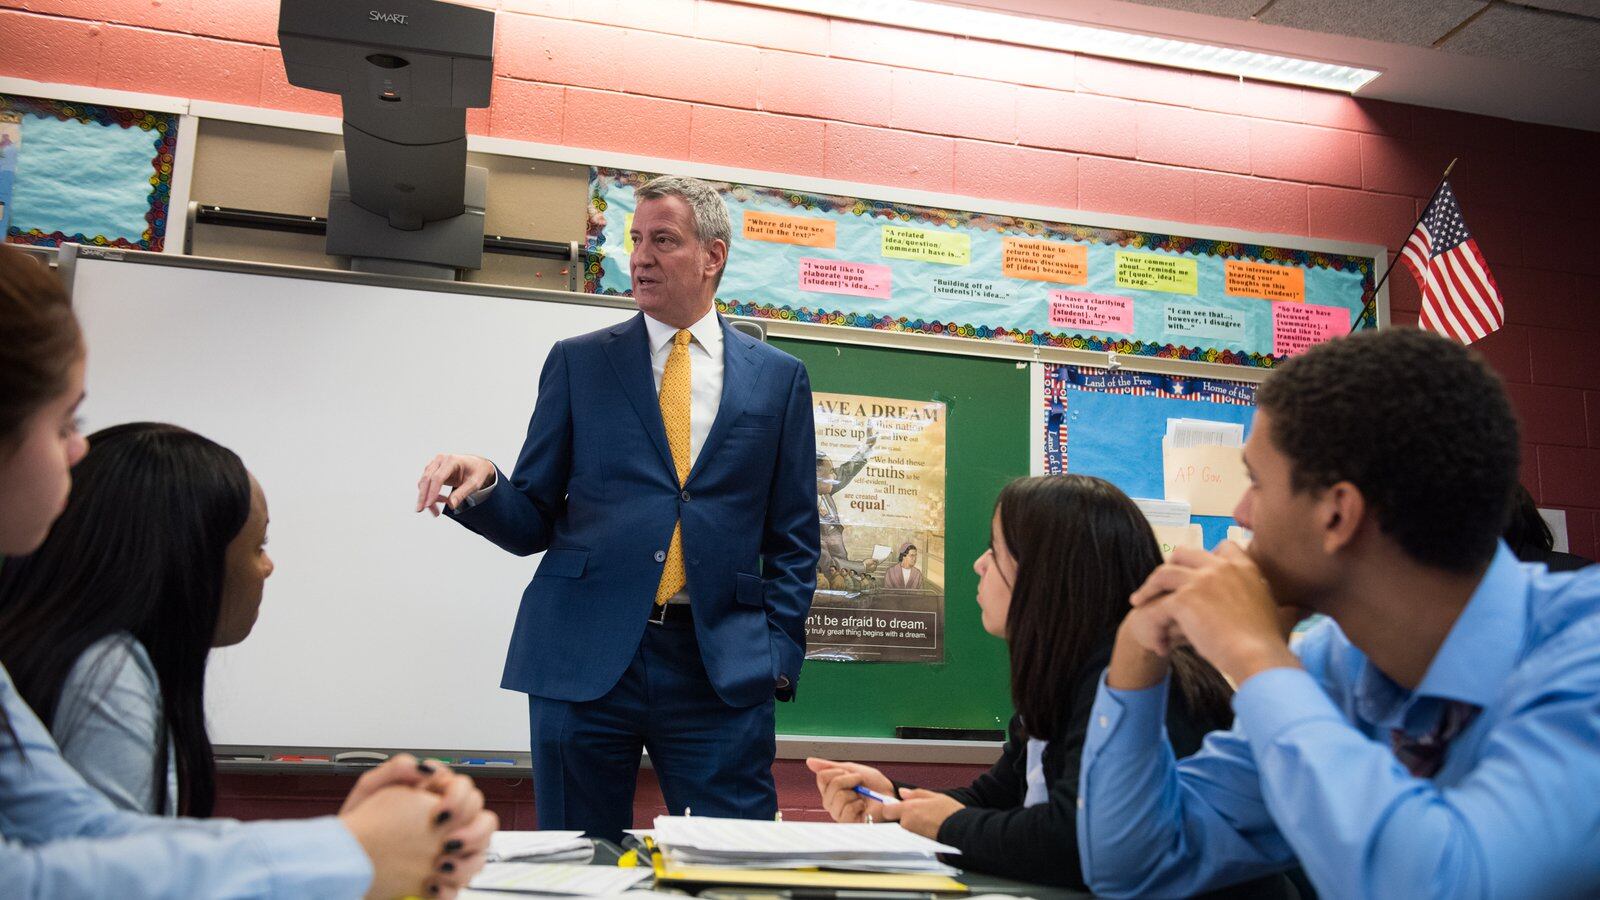  New York City Mayor Bill de Blasio speaks at the Bronx School for Law, Government, and Justice in 2017.